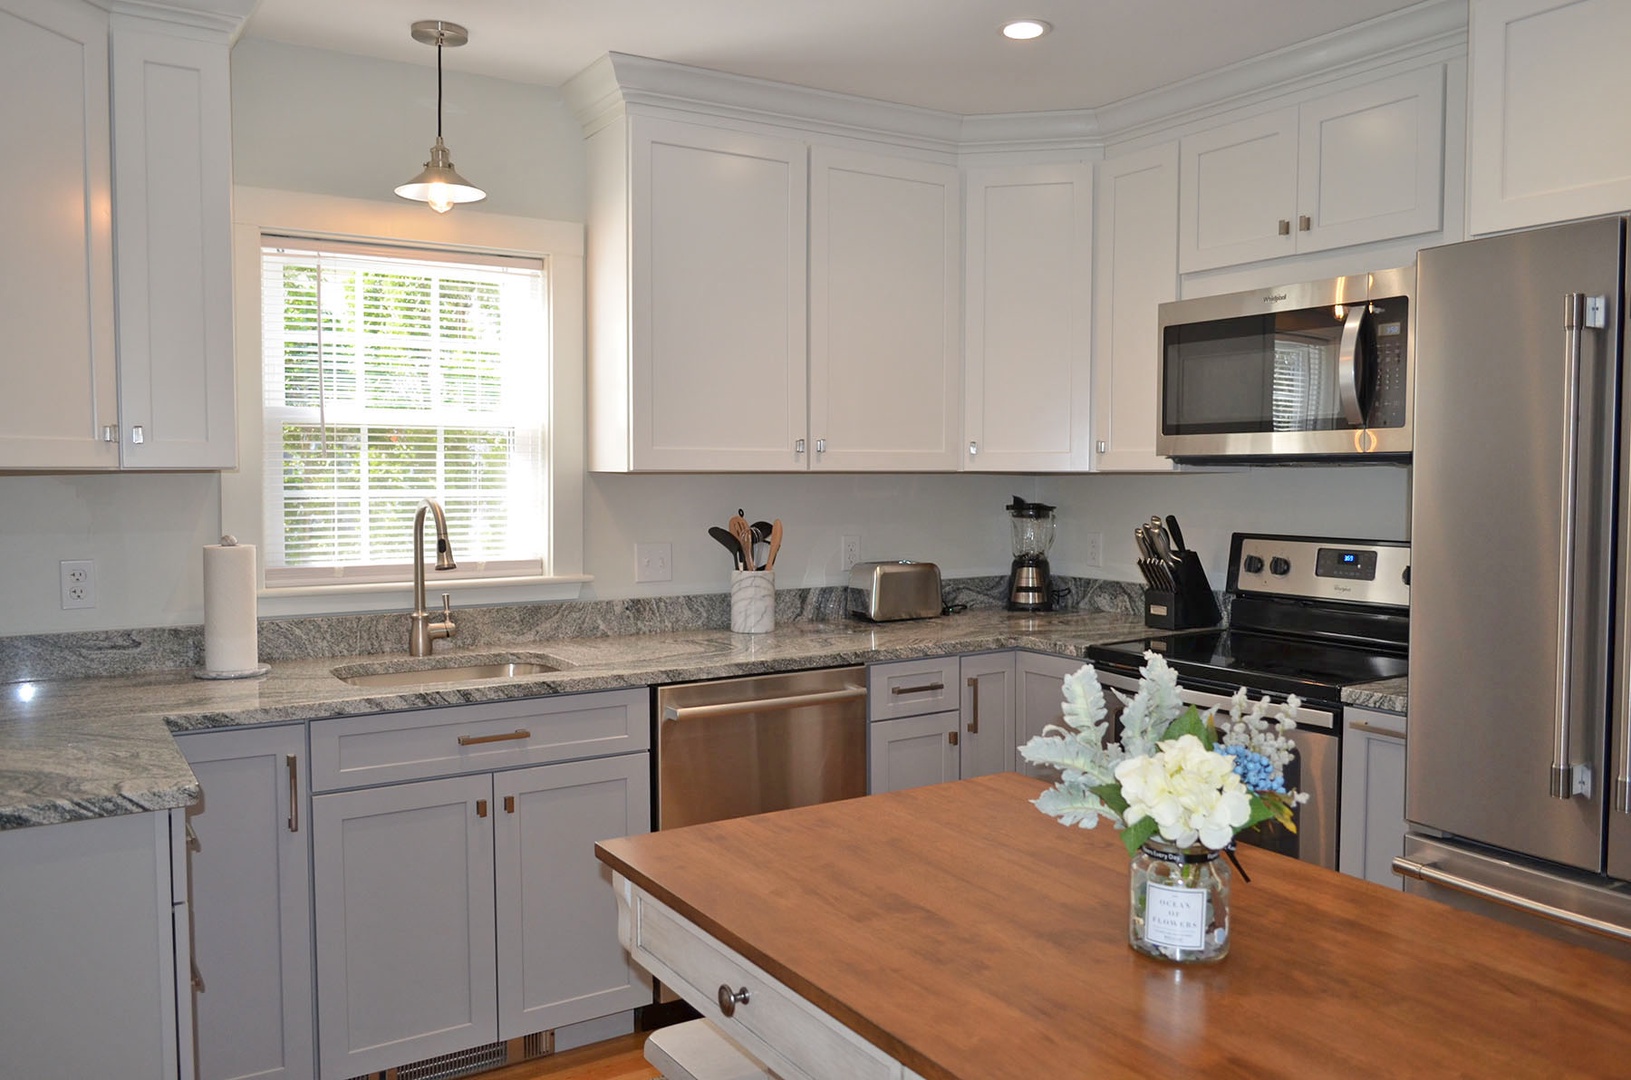 The kitchen features modern appliances and granite counter tops.